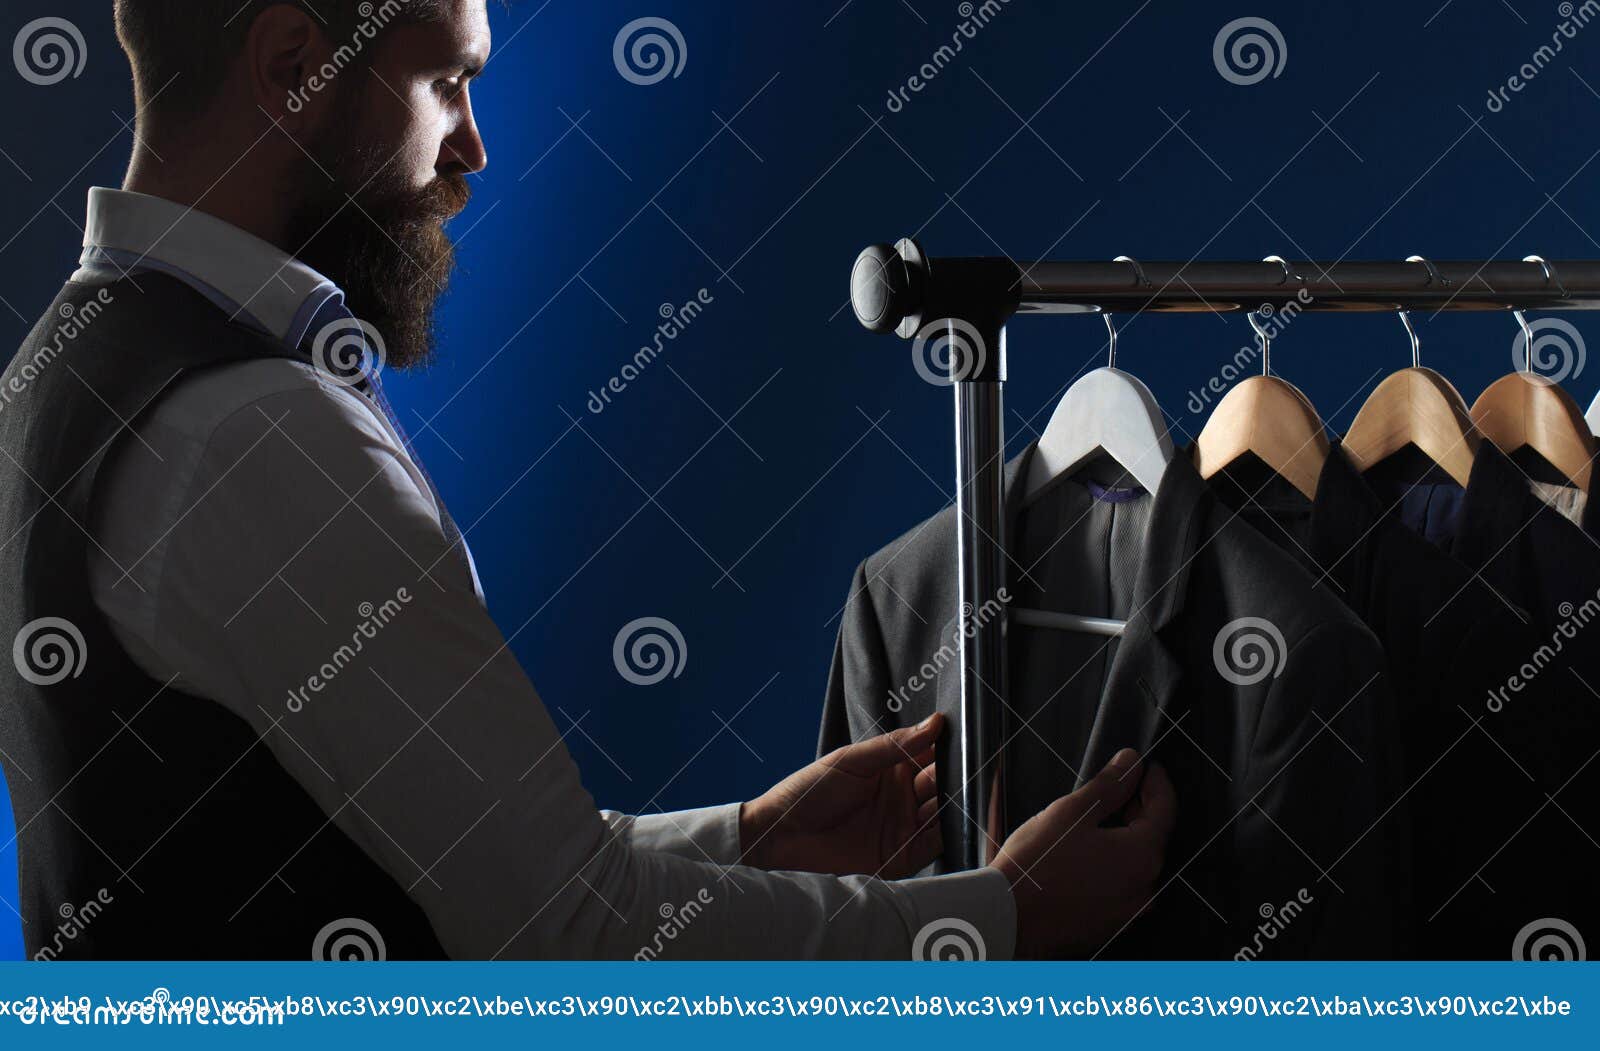 men`s clothing, shopping in boutiques. tailor, tailoring. stylish men`s suit. men`s suit, tailor in his workshop